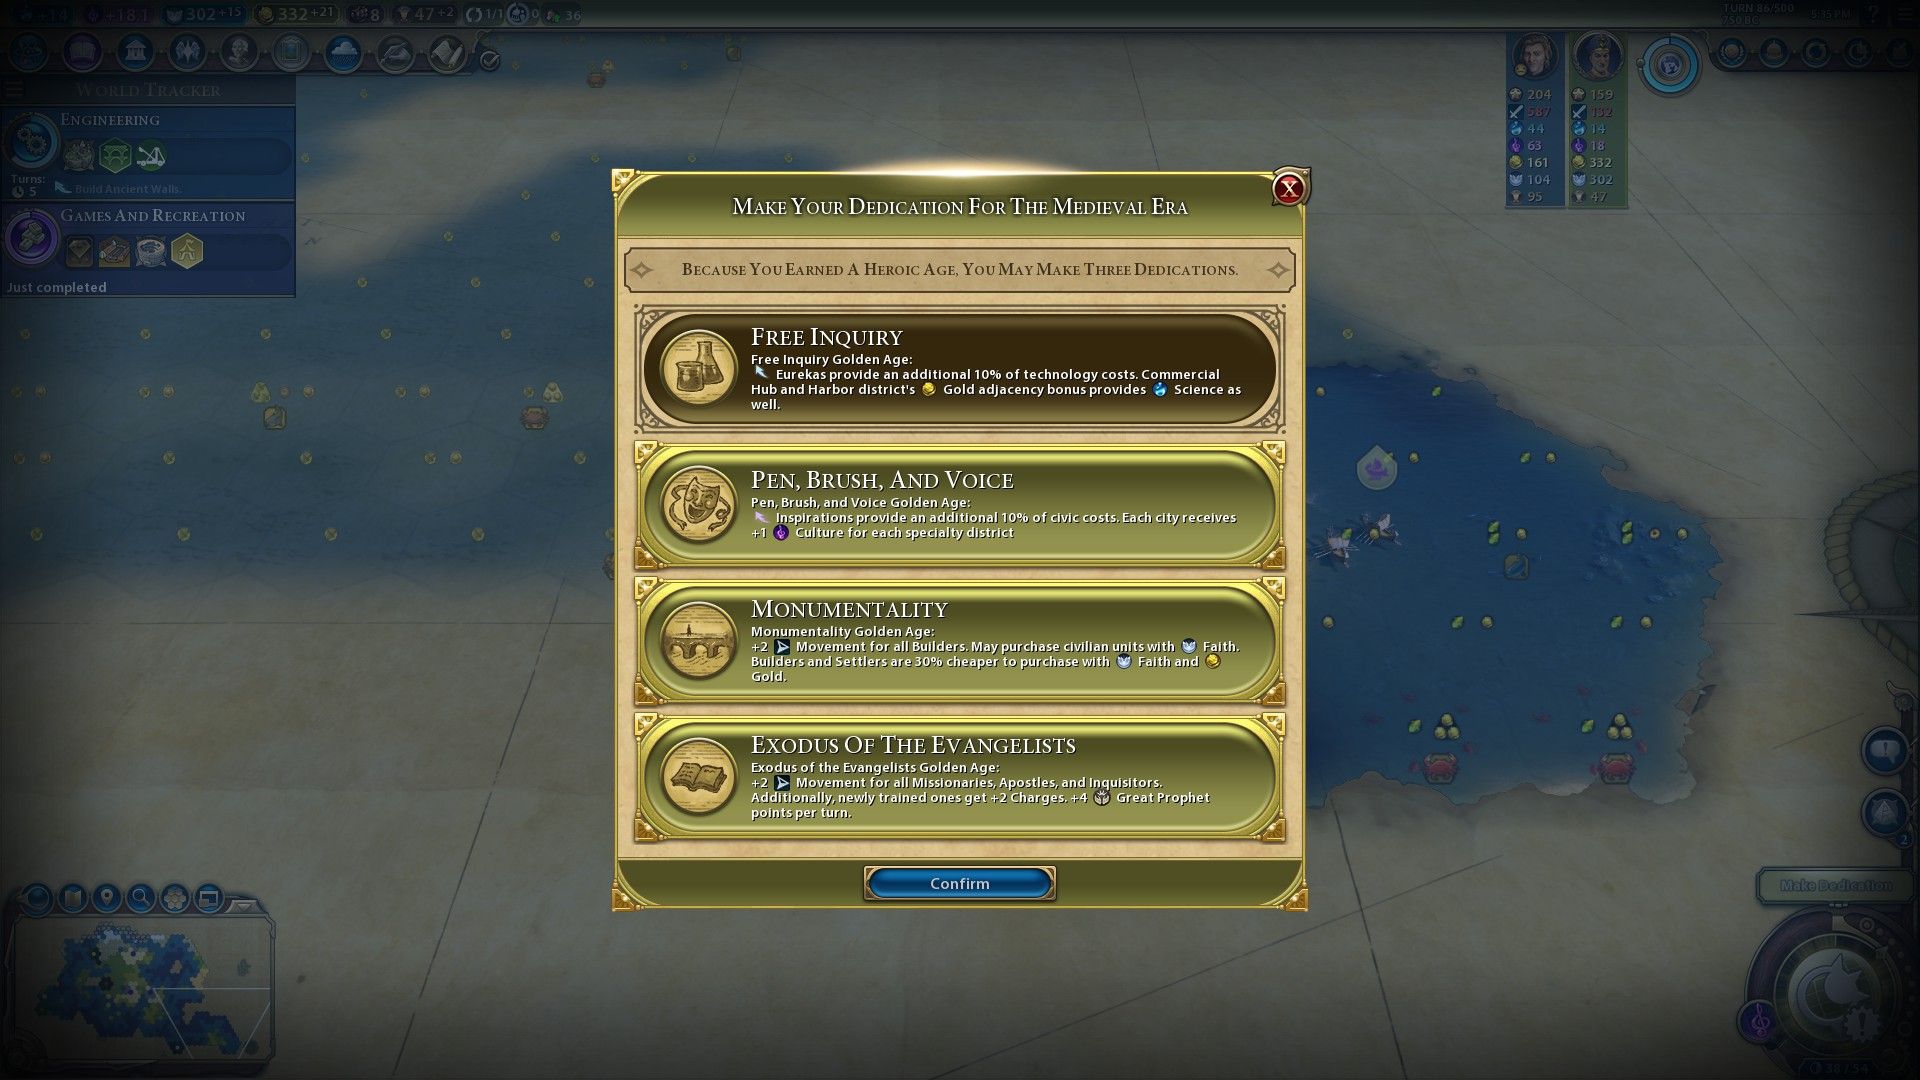 the Dedication Screen for a Heroic Age in the Medieval Era in Civilization 6